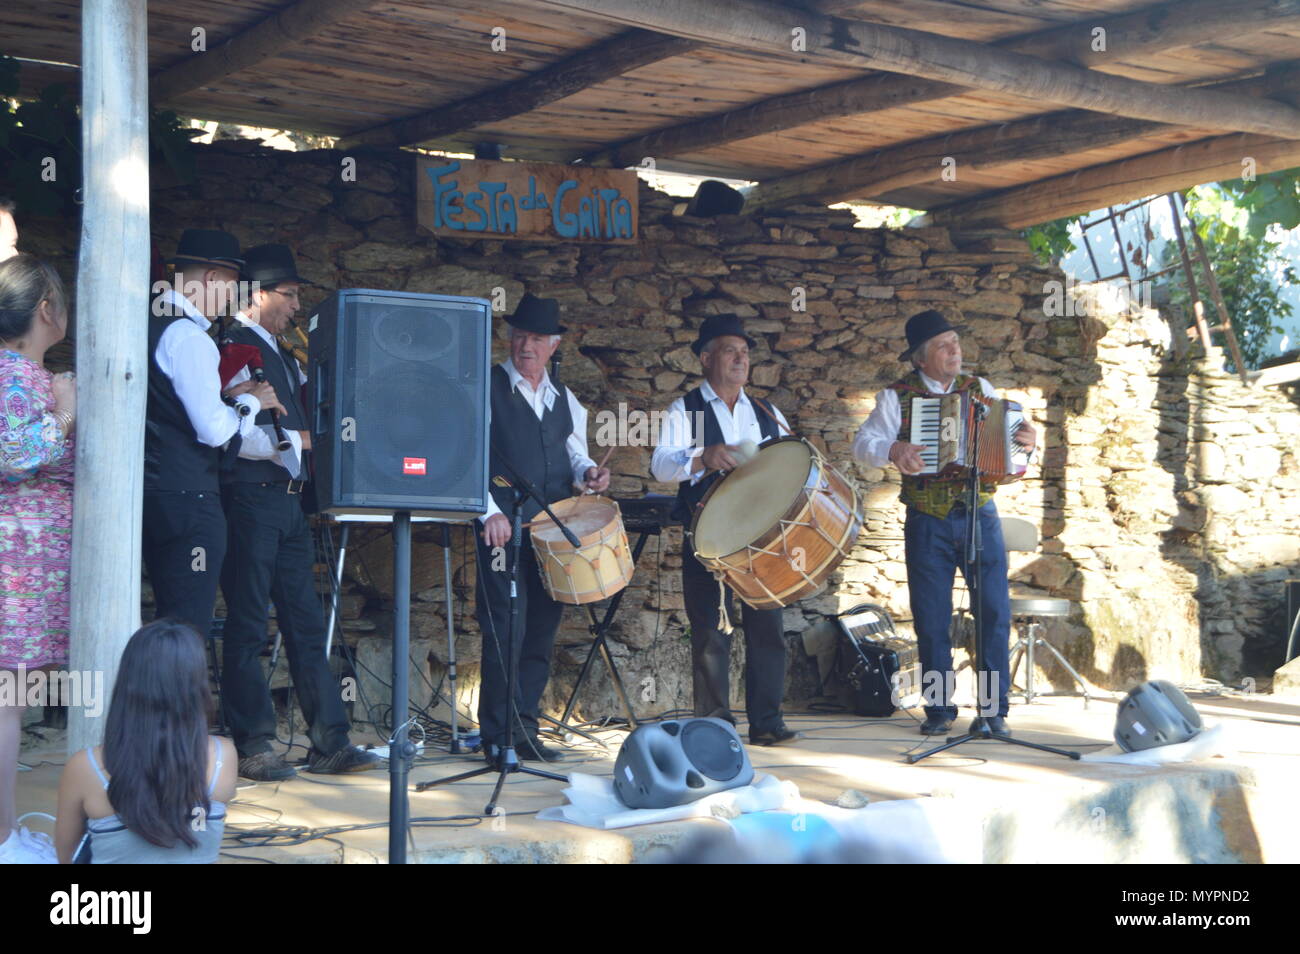 Group Of Accordion, Bagpipe And Drum In The Party Of The Bagpipe In Quinta De Cancelada. August 20, 2016. Quinta De Cancelada Lugo Galicia Spain. Stock Photo